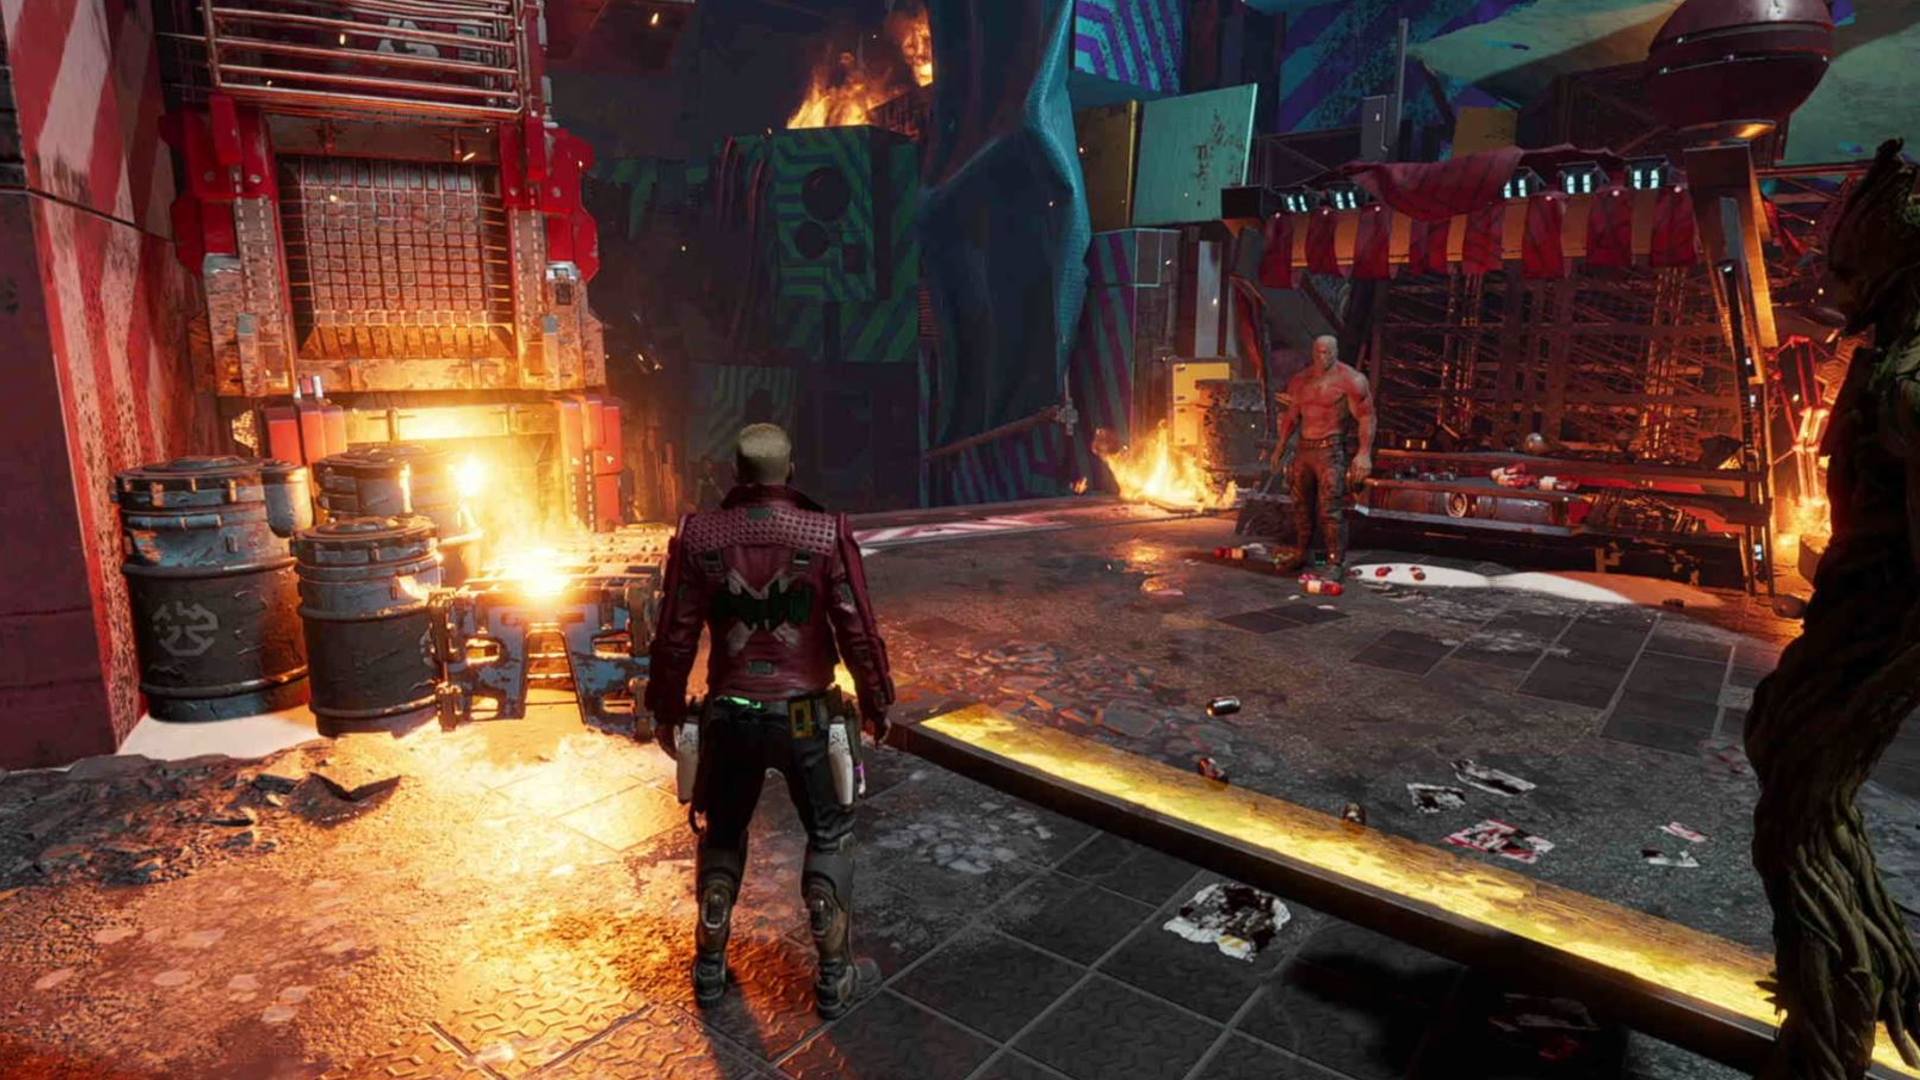 Guardians of the Galaxy outfit locations: Star-Lord is looking at a path which has the outfit box.